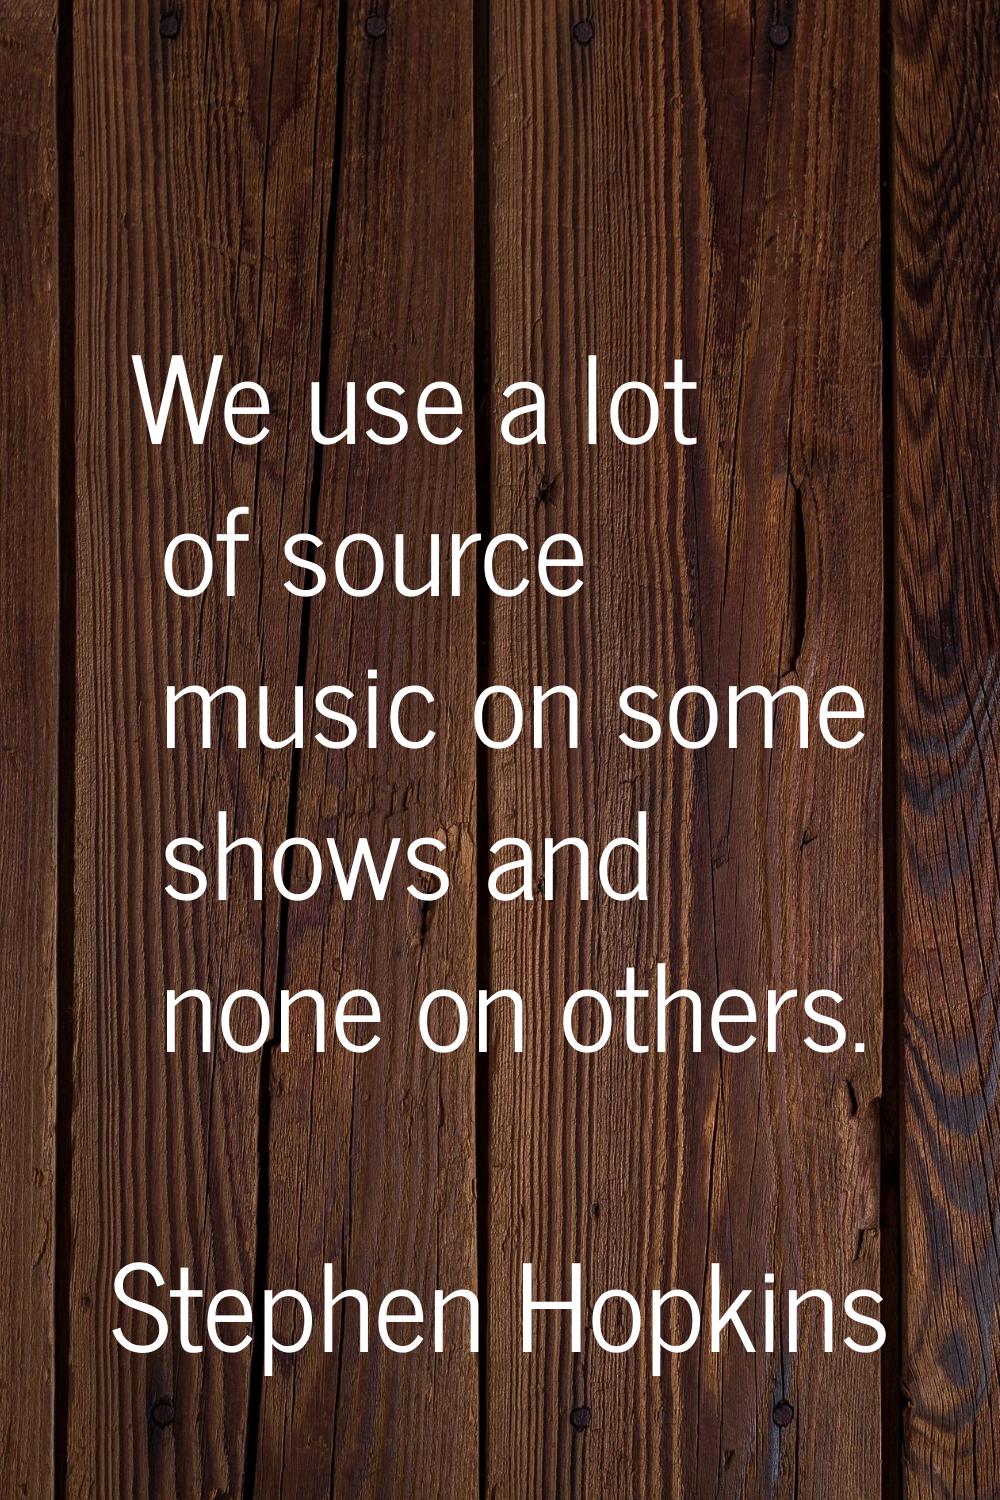 We use a lot of source music on some shows and none on others.